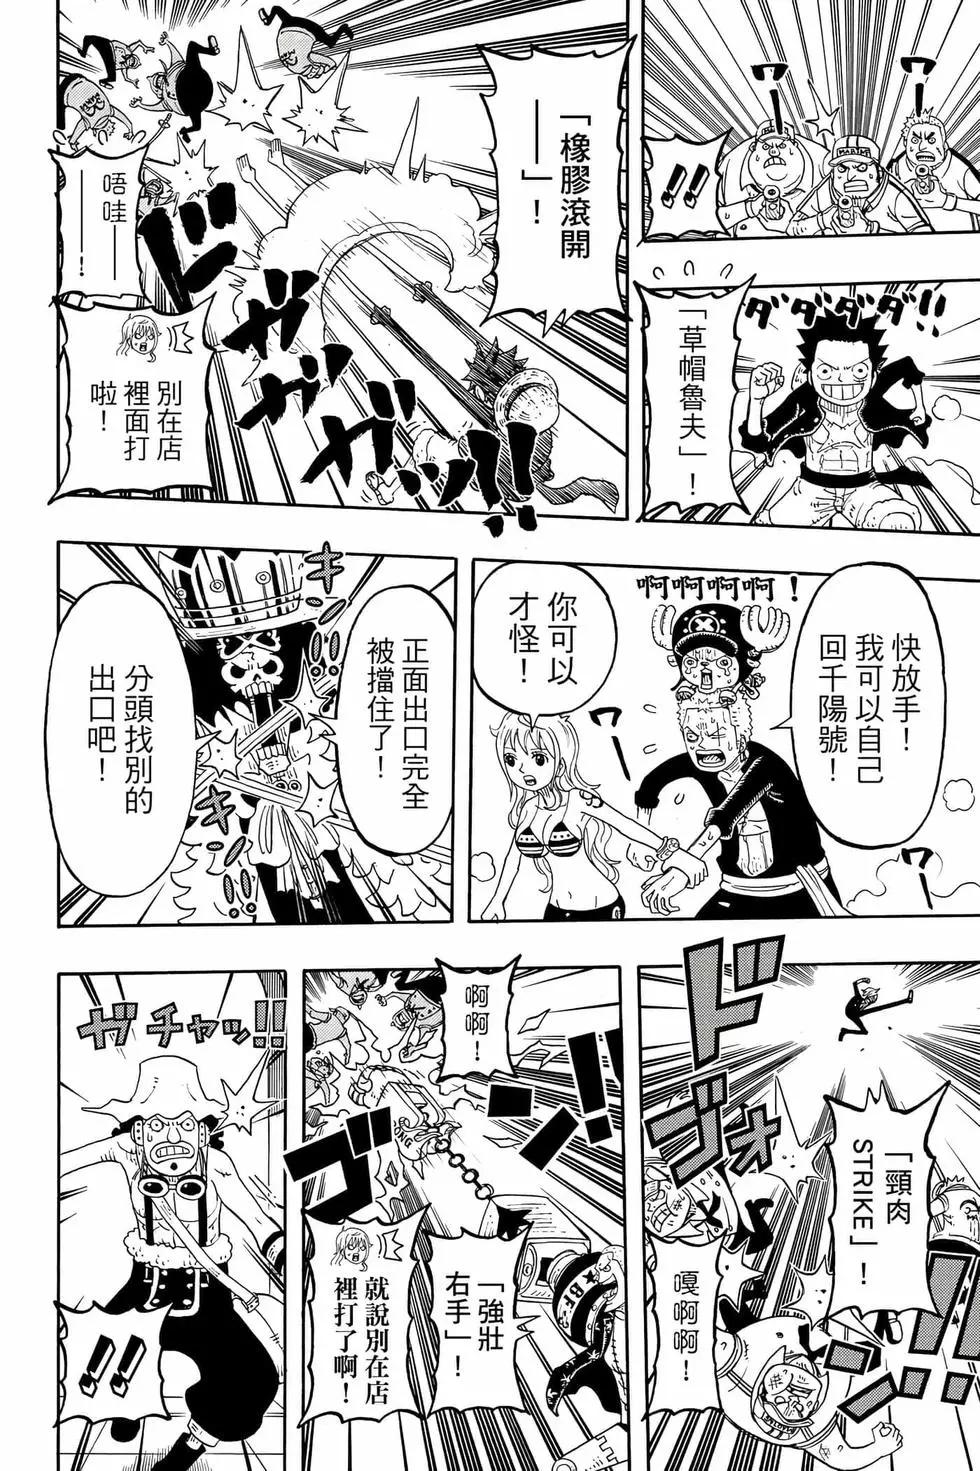 One piece party - 第04卷(1/4) - 5